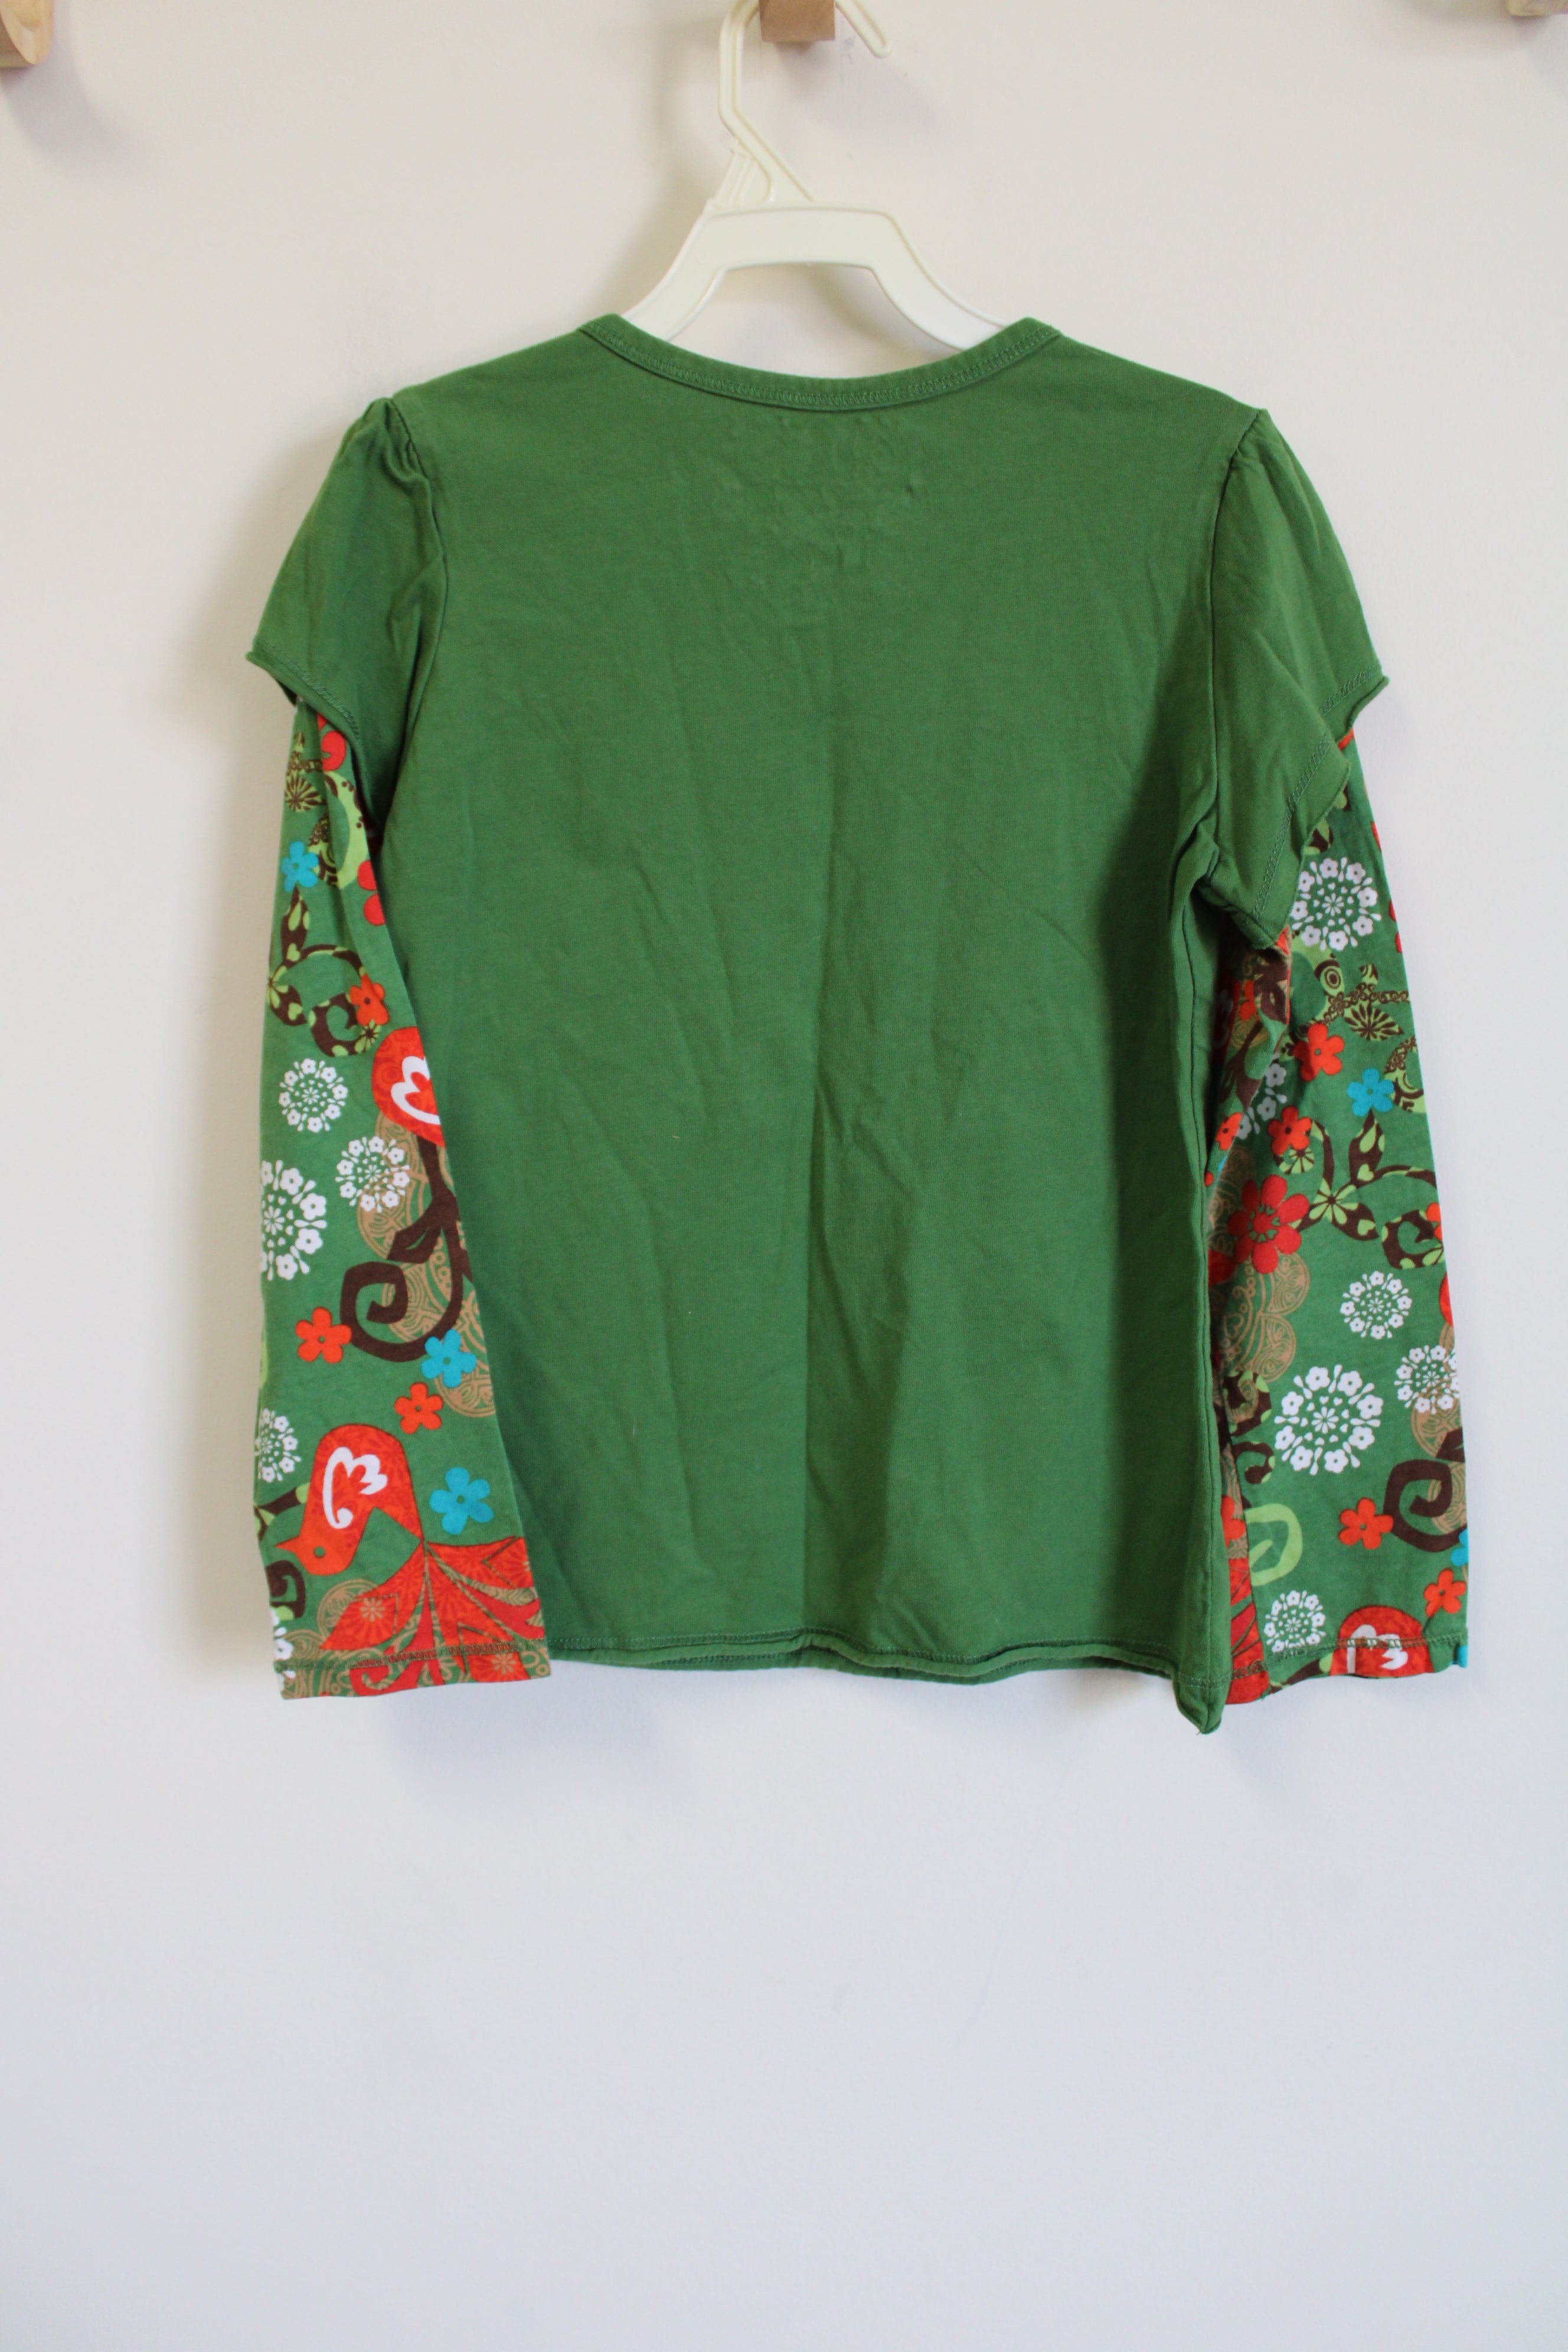 Children's Place Nature's Friends Green Top | 7/8